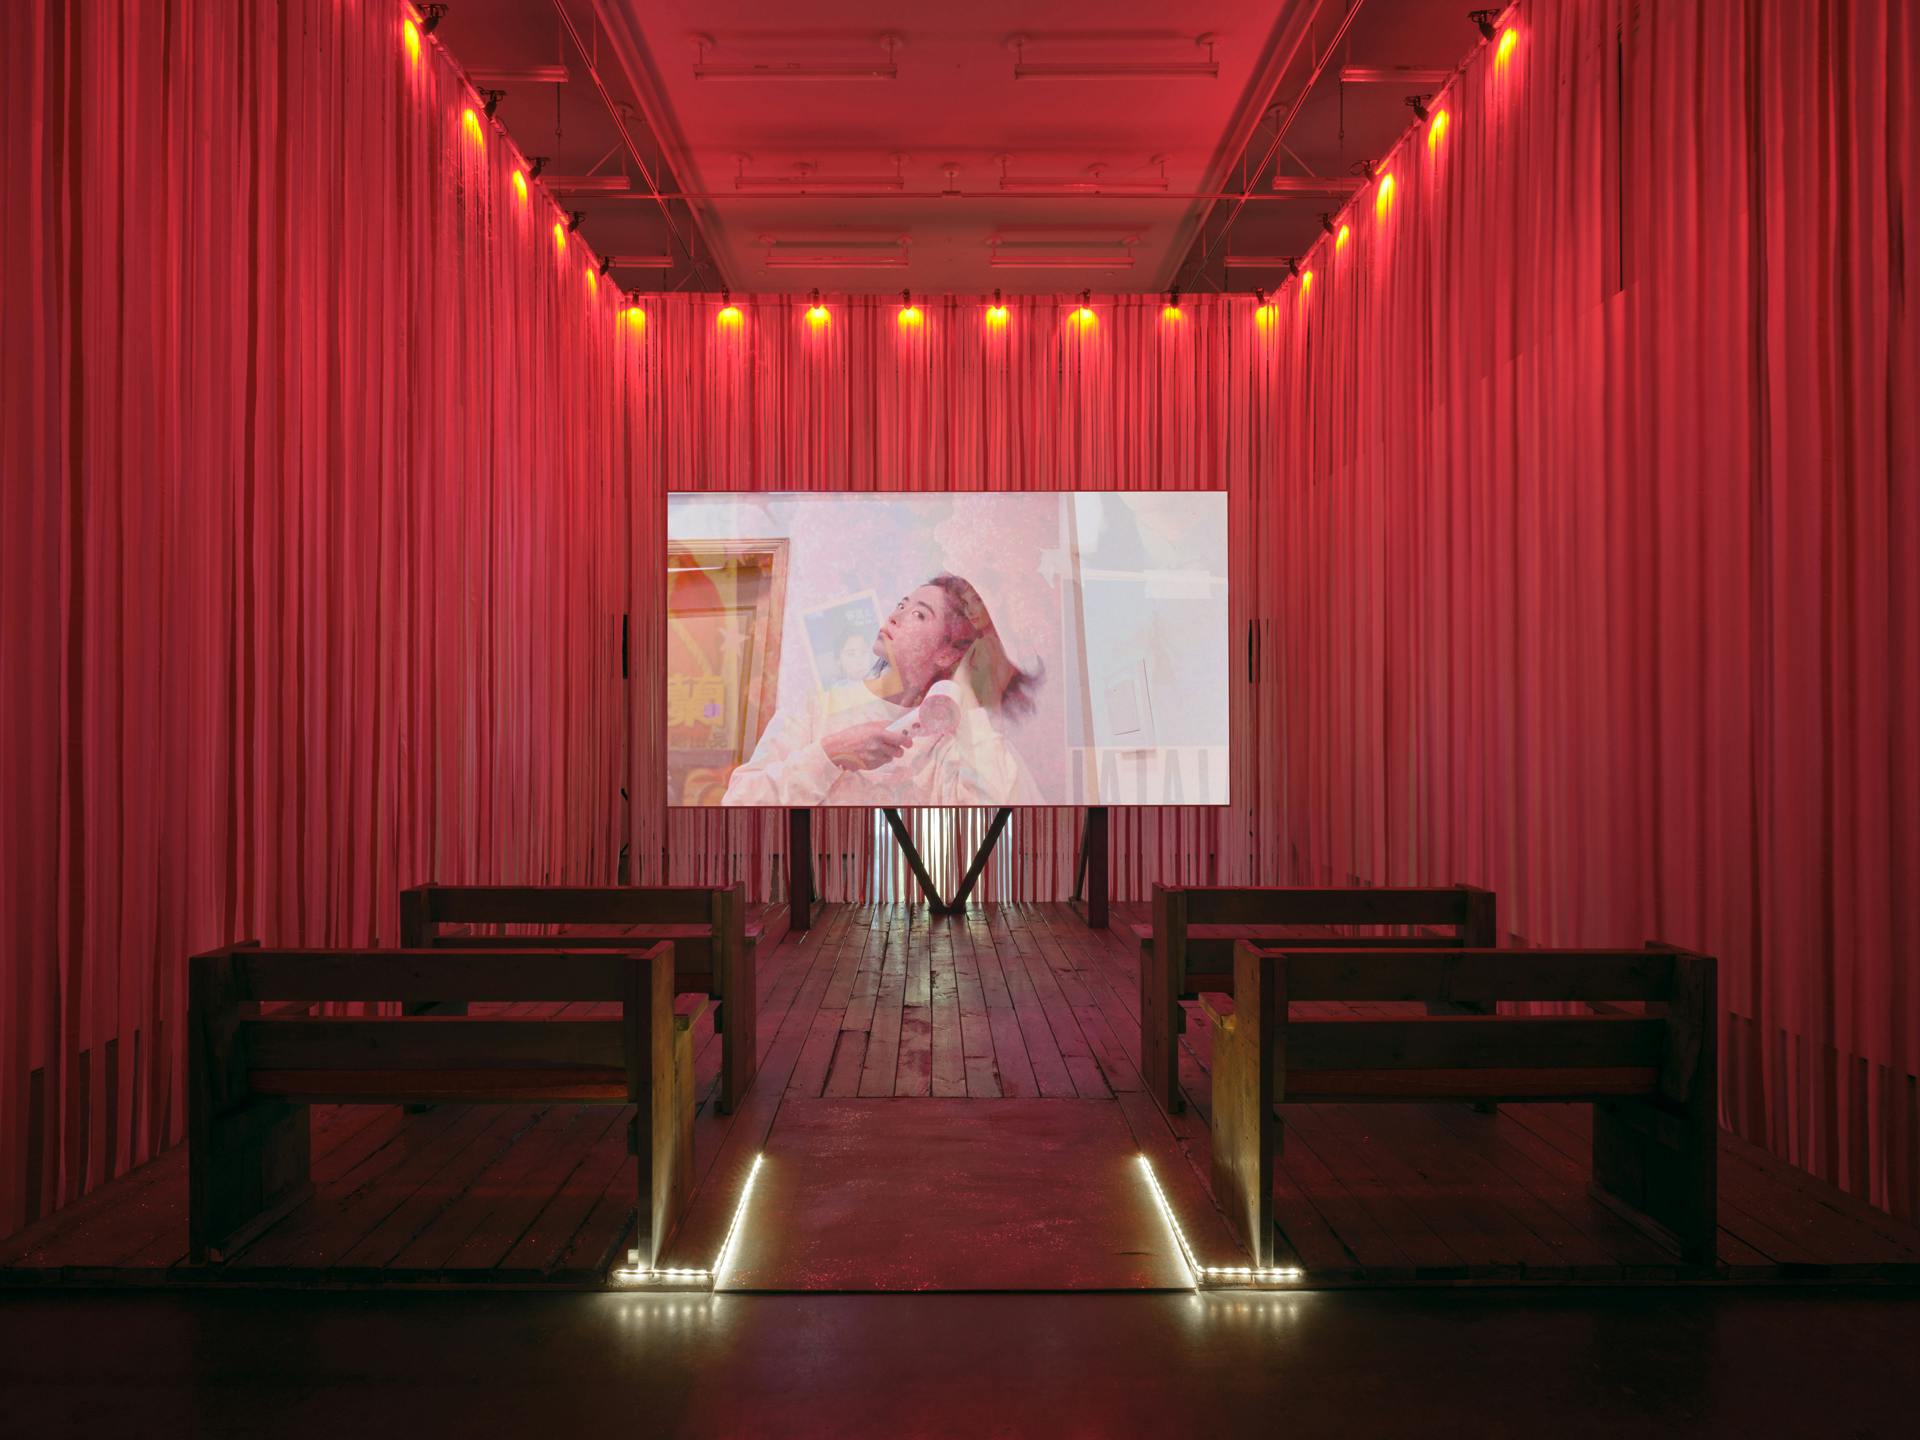 Two rows of benches face a screen in a room with pink and red ribbons walls. Onscreen, an image of a woman blowdrying her hair is overlain on a collage made of movie paraphernalia.